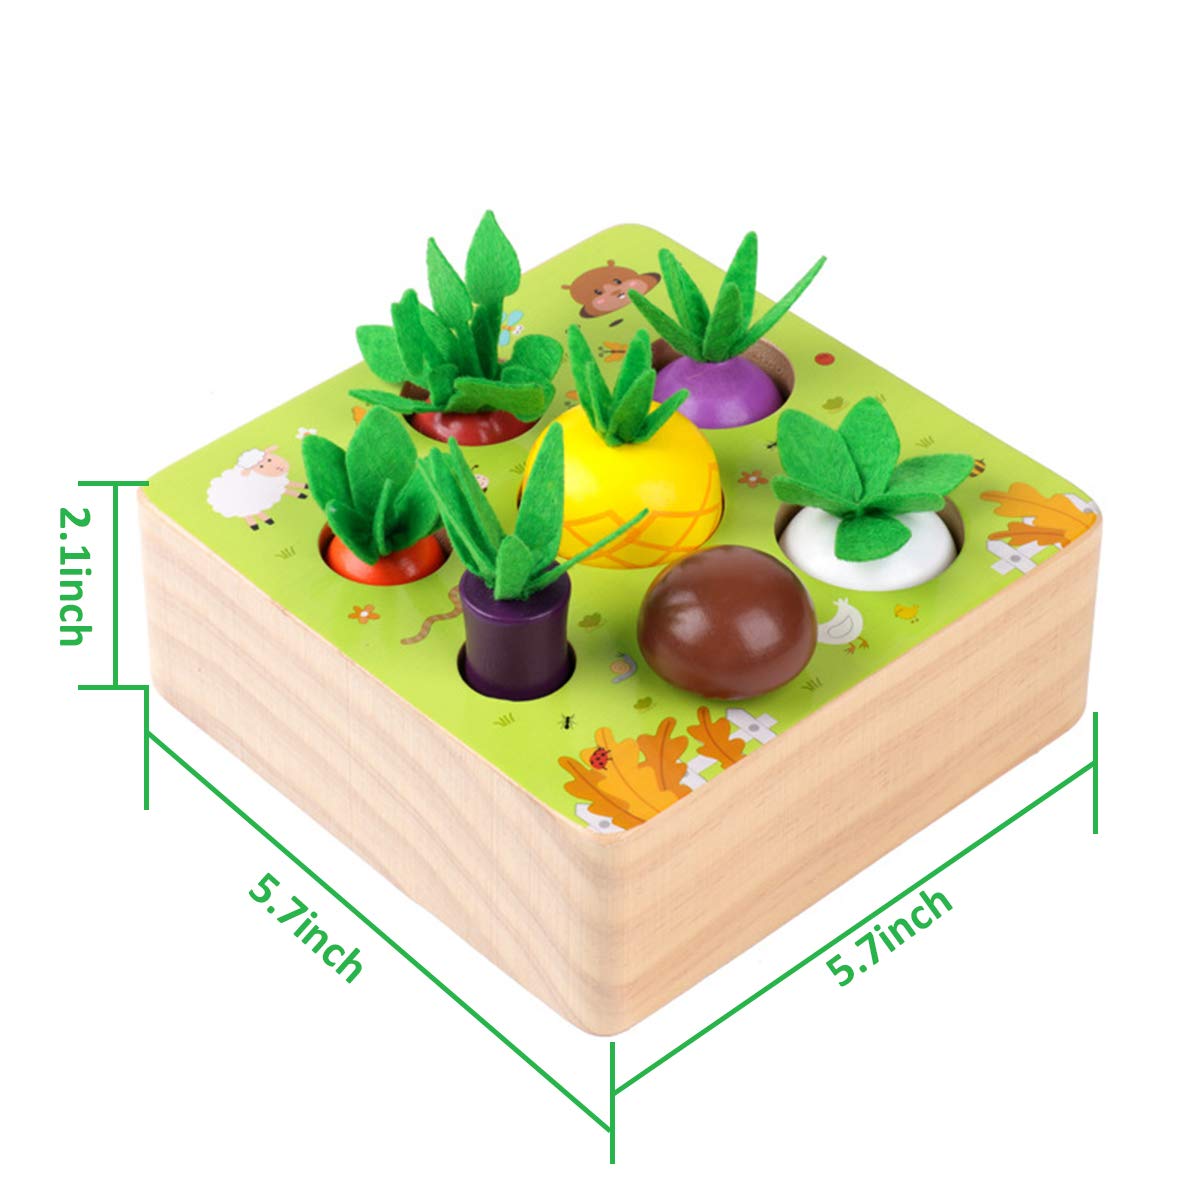 SKYFIELD Wooden Farm Harvest Game Montessori Toy, Early Learning Toy for Boys and Girls 1 2 3 Years Old, Shape Sorting Educational Toy with 7 Sizes Vegetable or Fruit, Gift for Toddlers 1-3